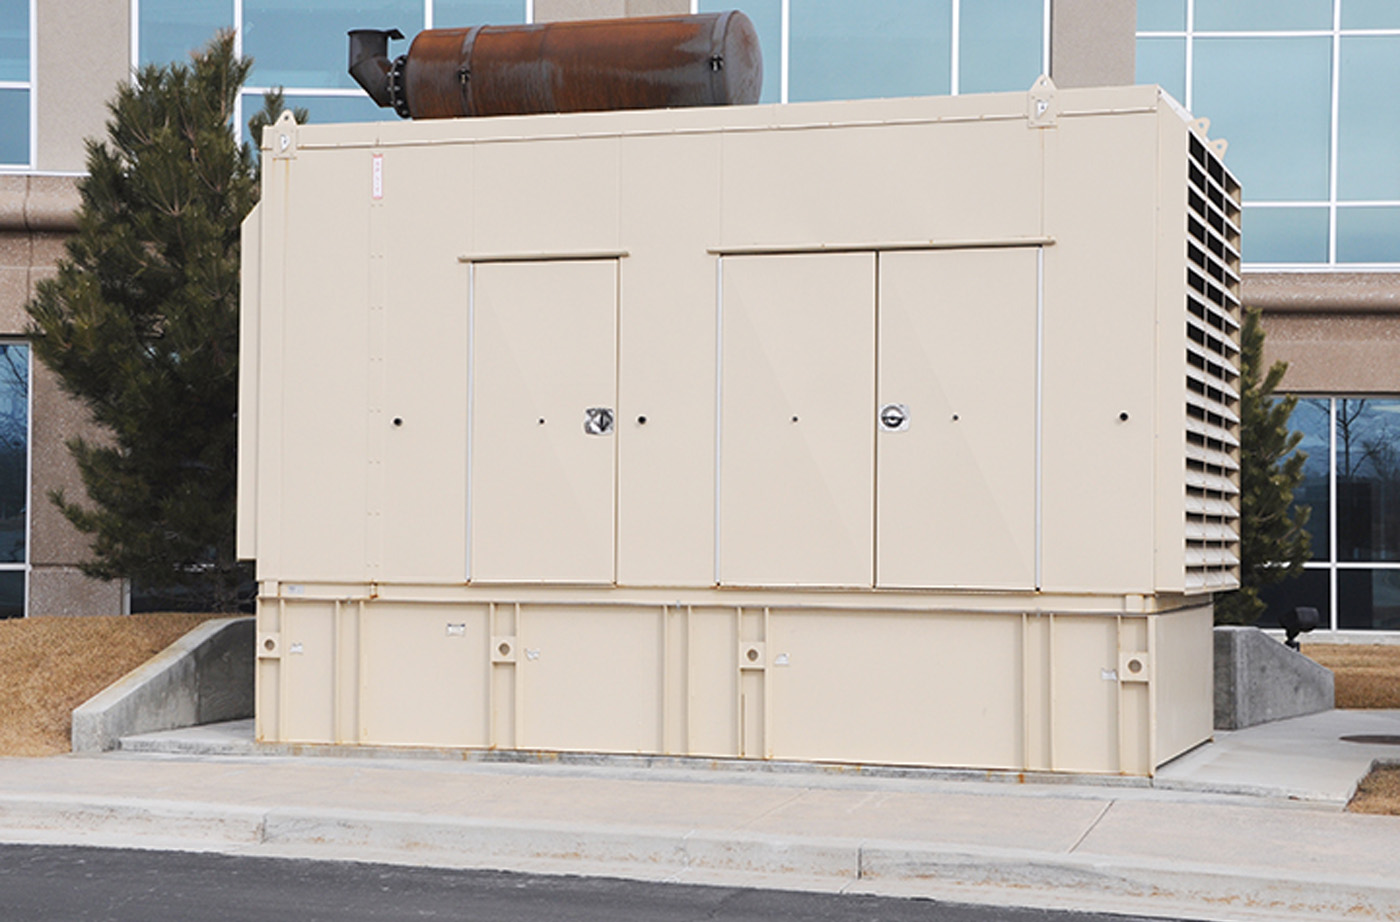 Beige power generator in front of a commercial building